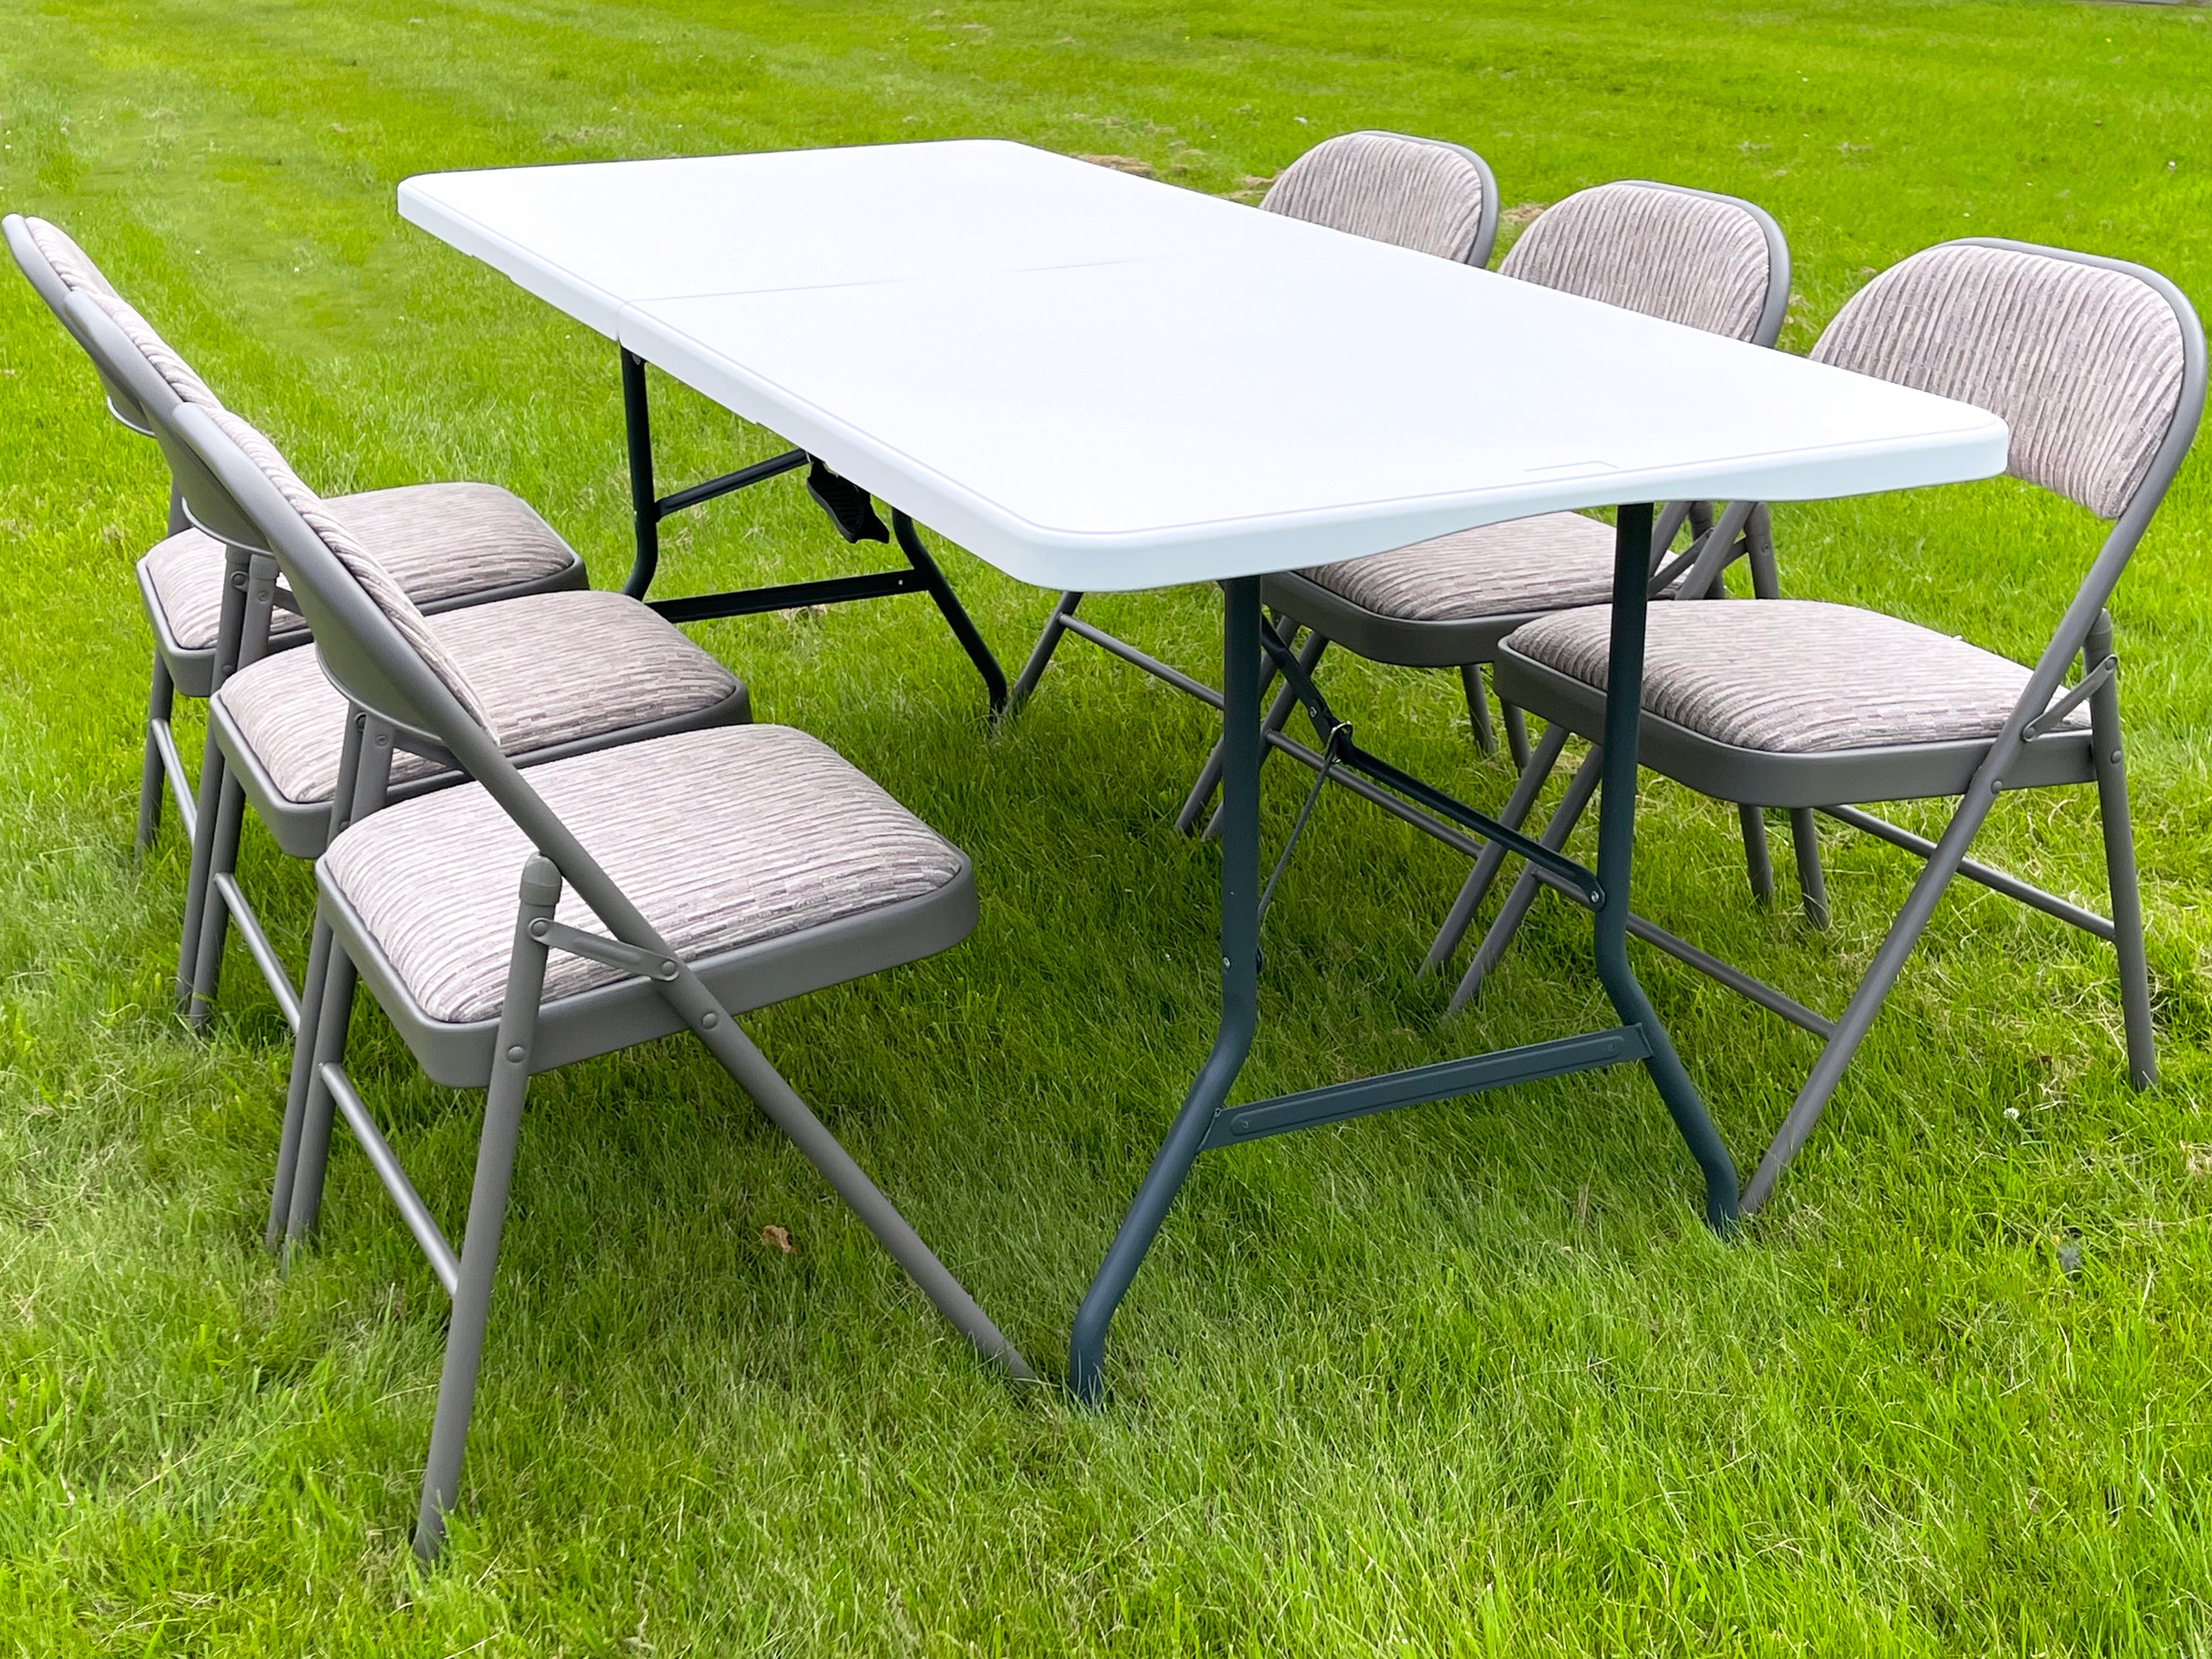 6 Feet Folding Table with 6 Fold Away Chairs